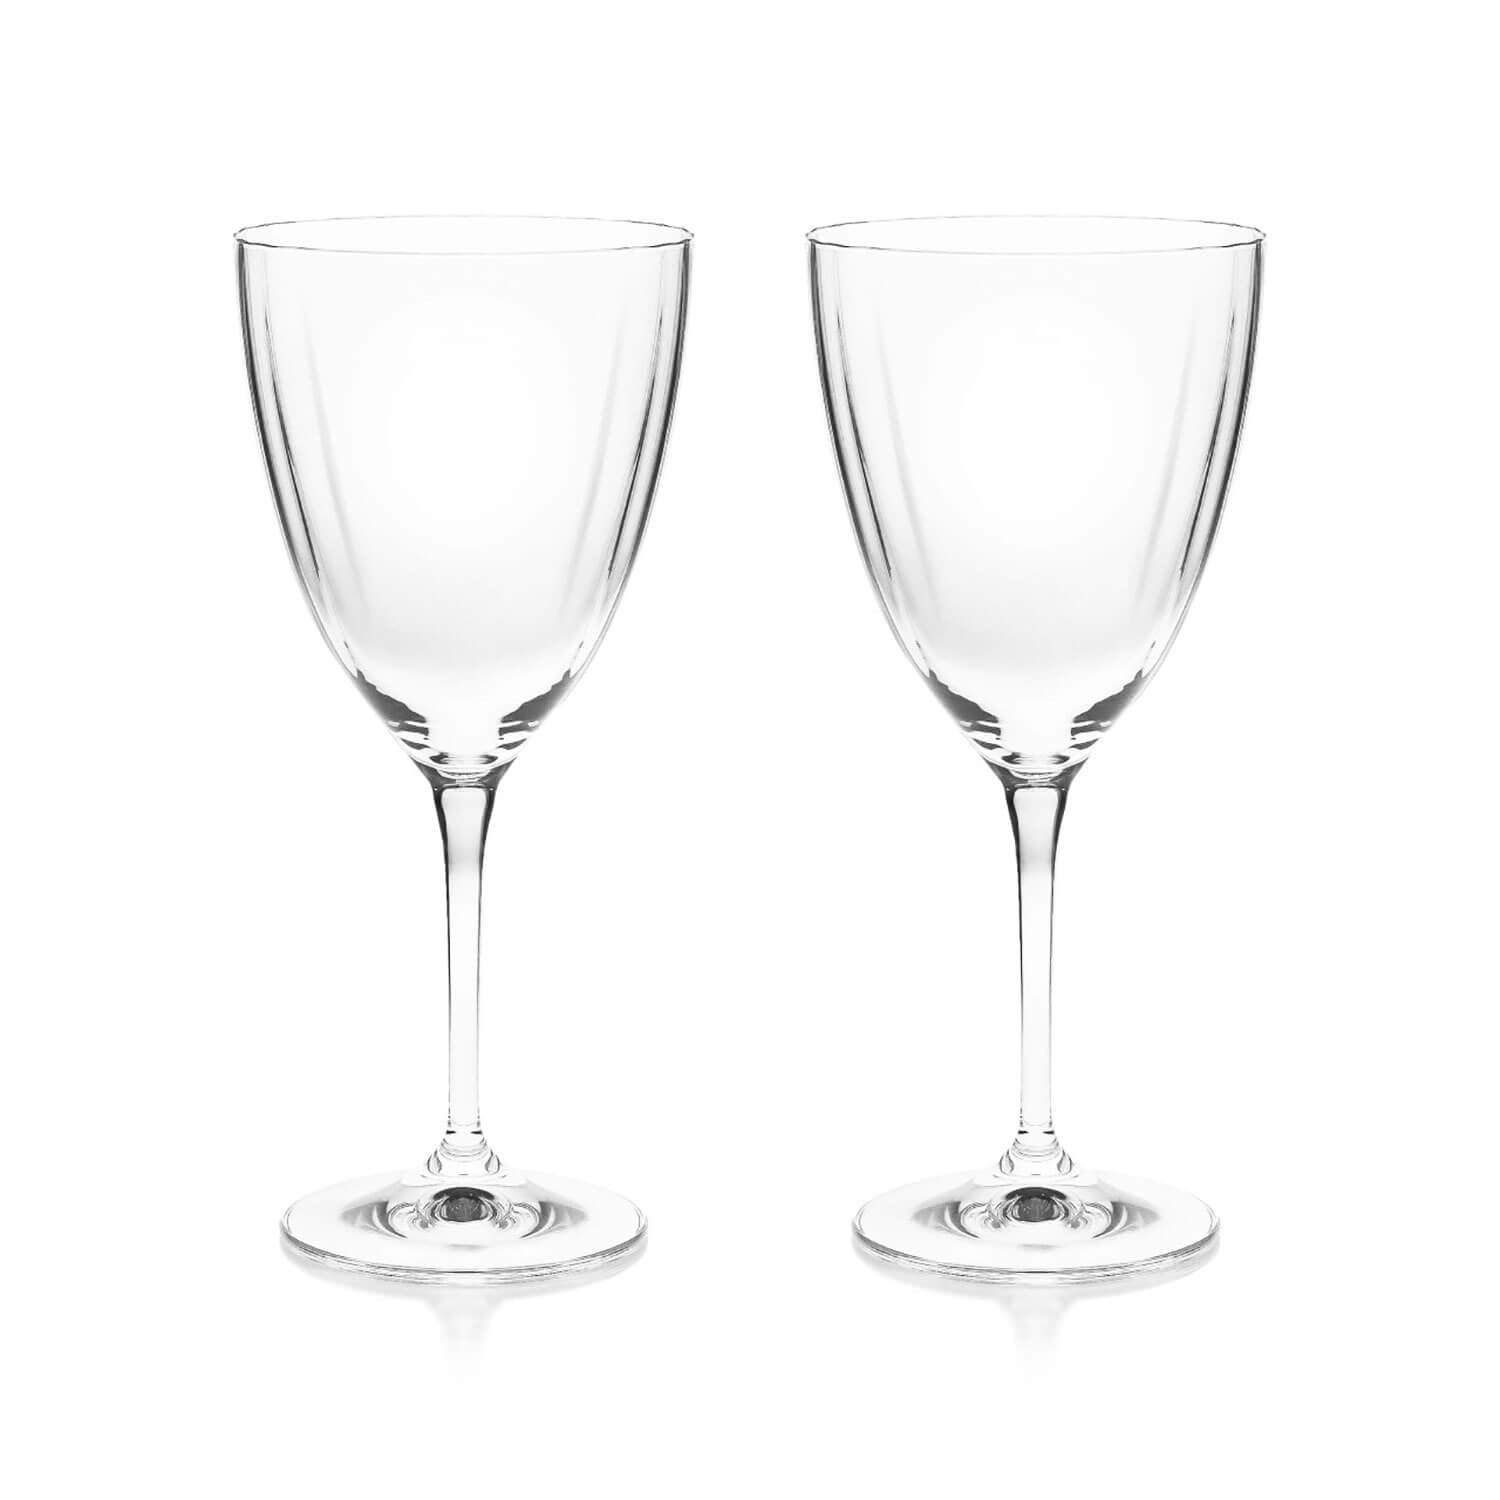 Tipperary Crystal Ripple Set of 2 Wine Glasses 1 Shaws Department Stores